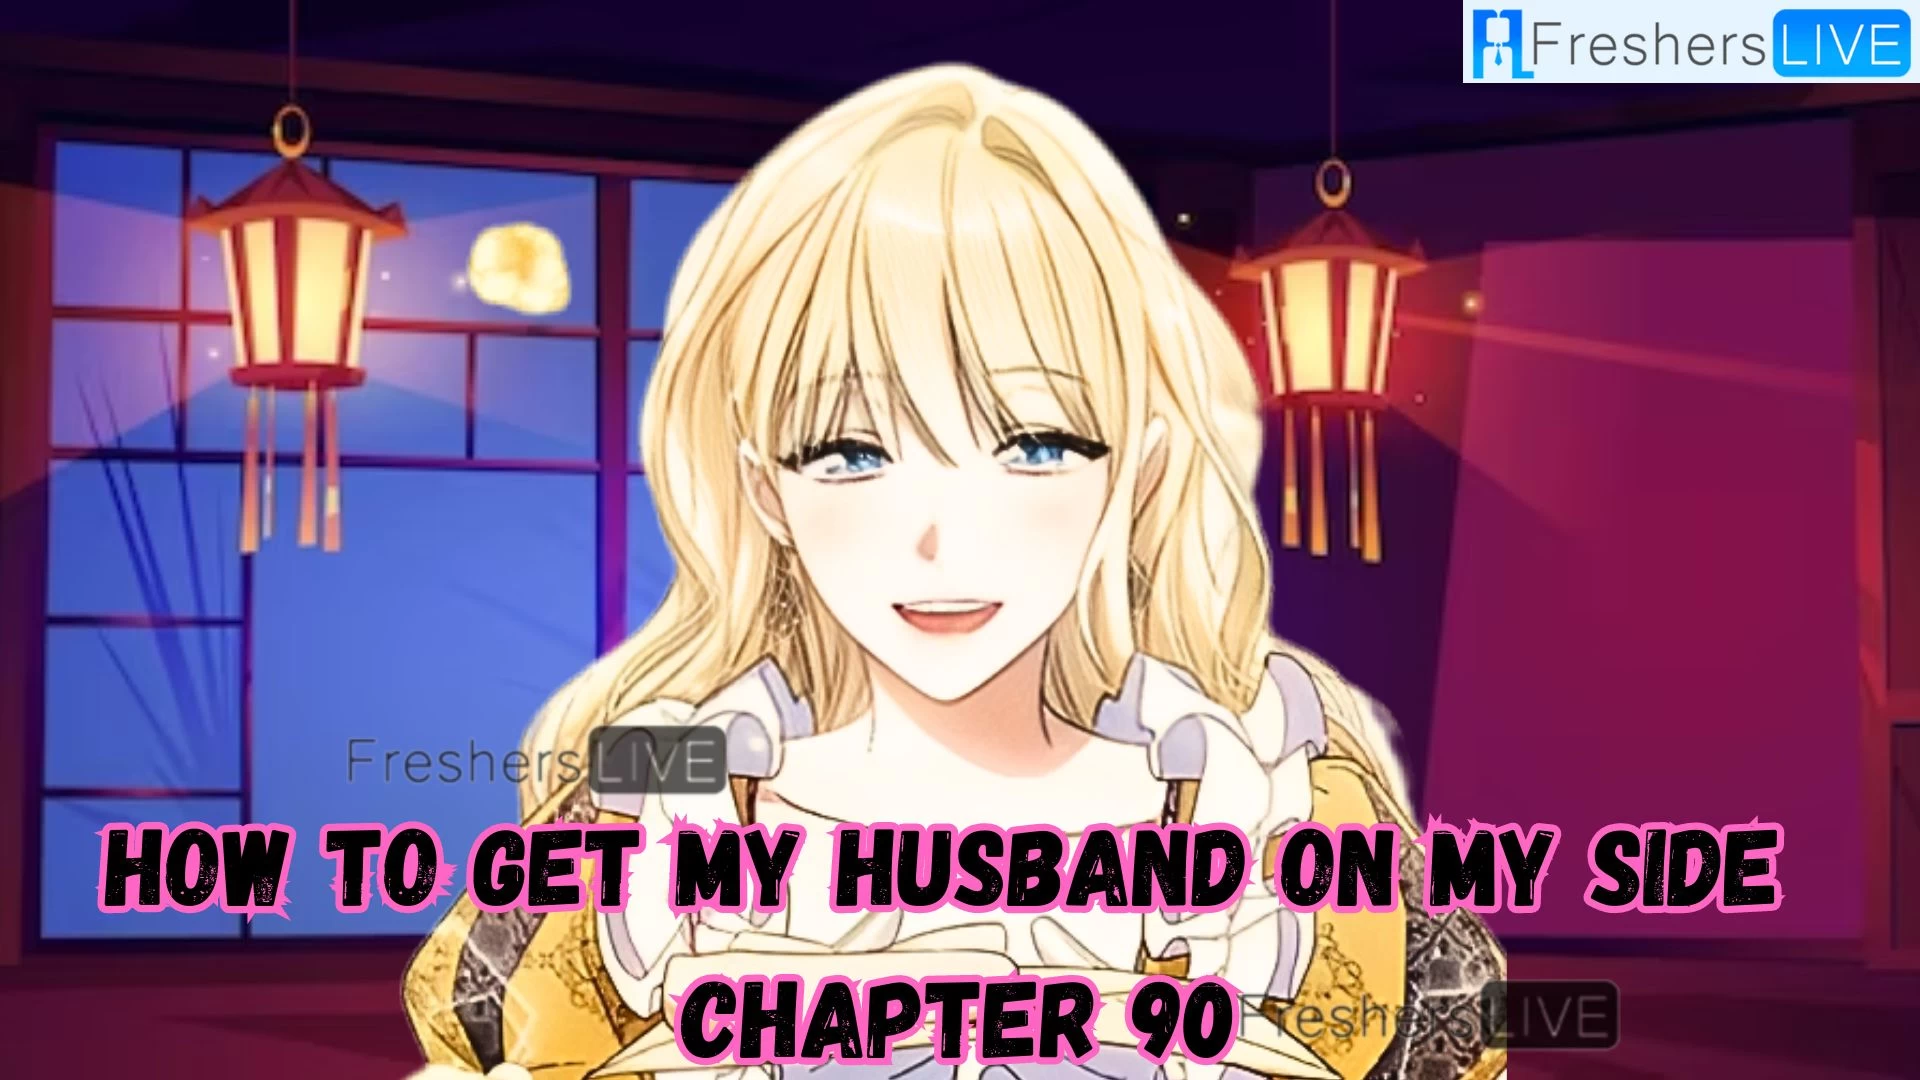 How to Get My Husband on My Side Chapter 90 Release Date, Spoilers, Raw Scans, and More